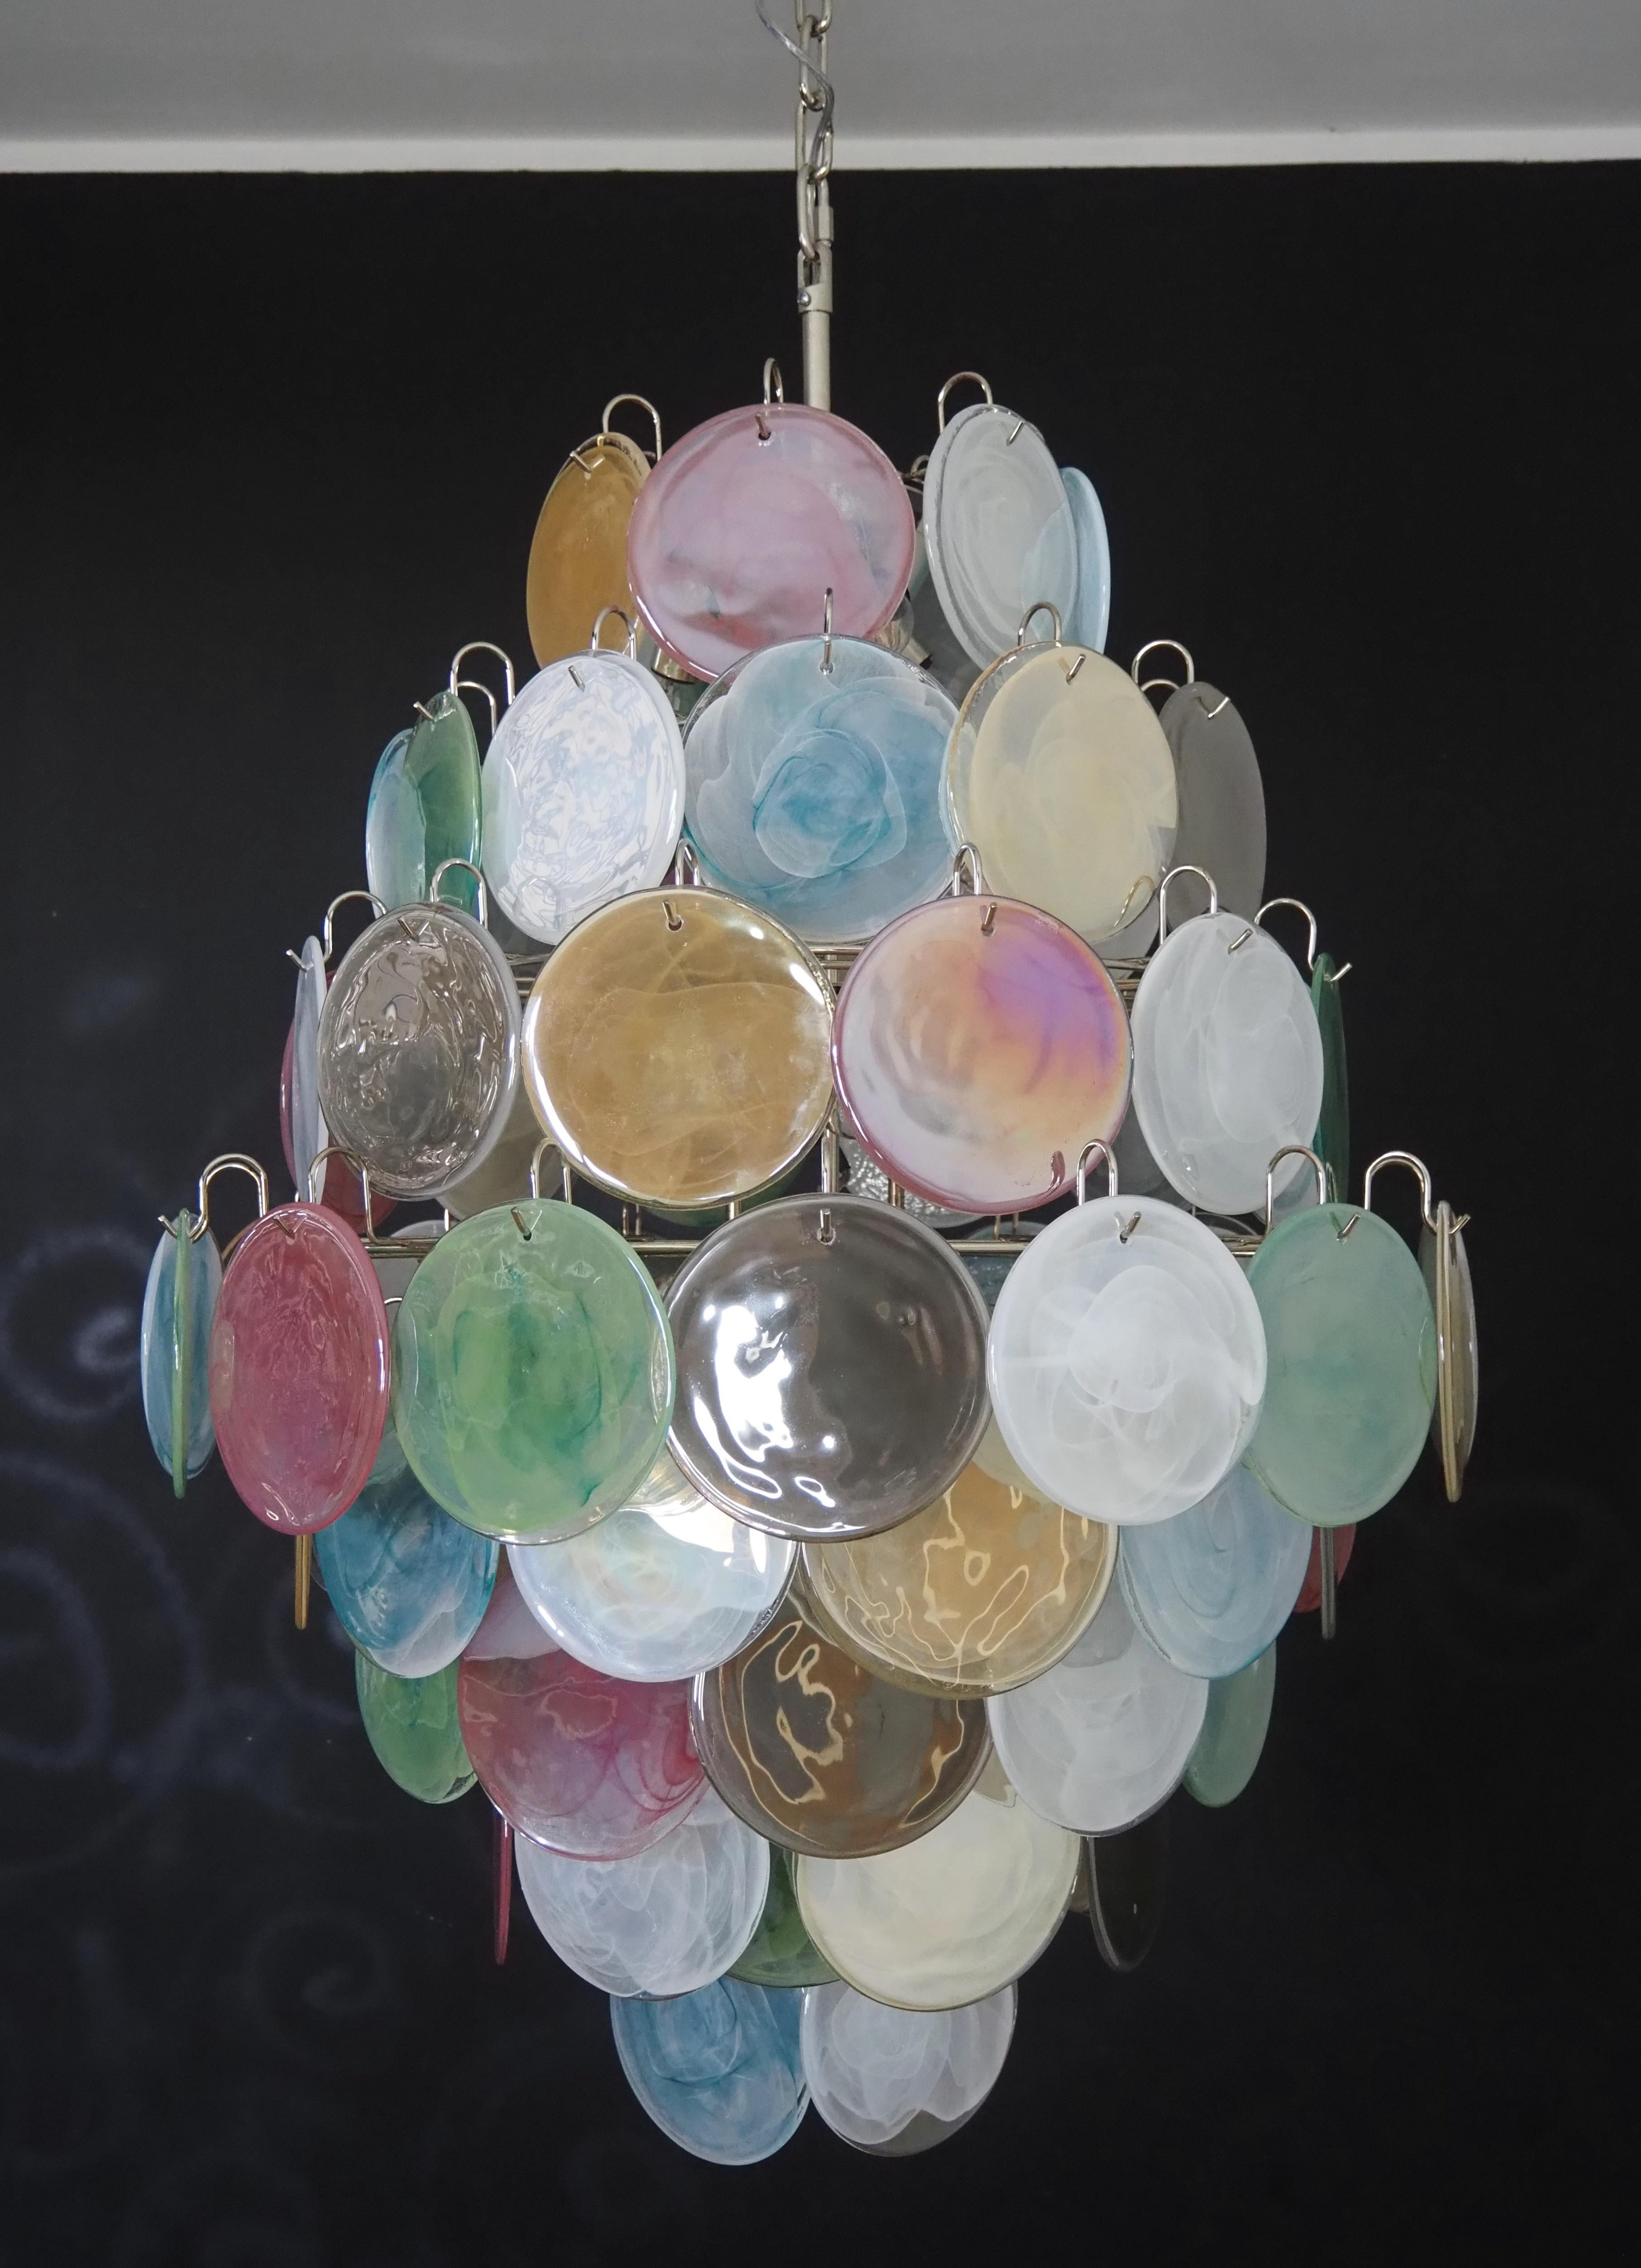 Vintage Italian Murano chandelier in Vistosi style. The chandelier has 87 fantastic multicolored alabaster iridescent glasses in a nickel metal frame.
Period: late 20th century
Dimensions: 67,80 inches (175 cm) height with chain; 40,70 inches (105